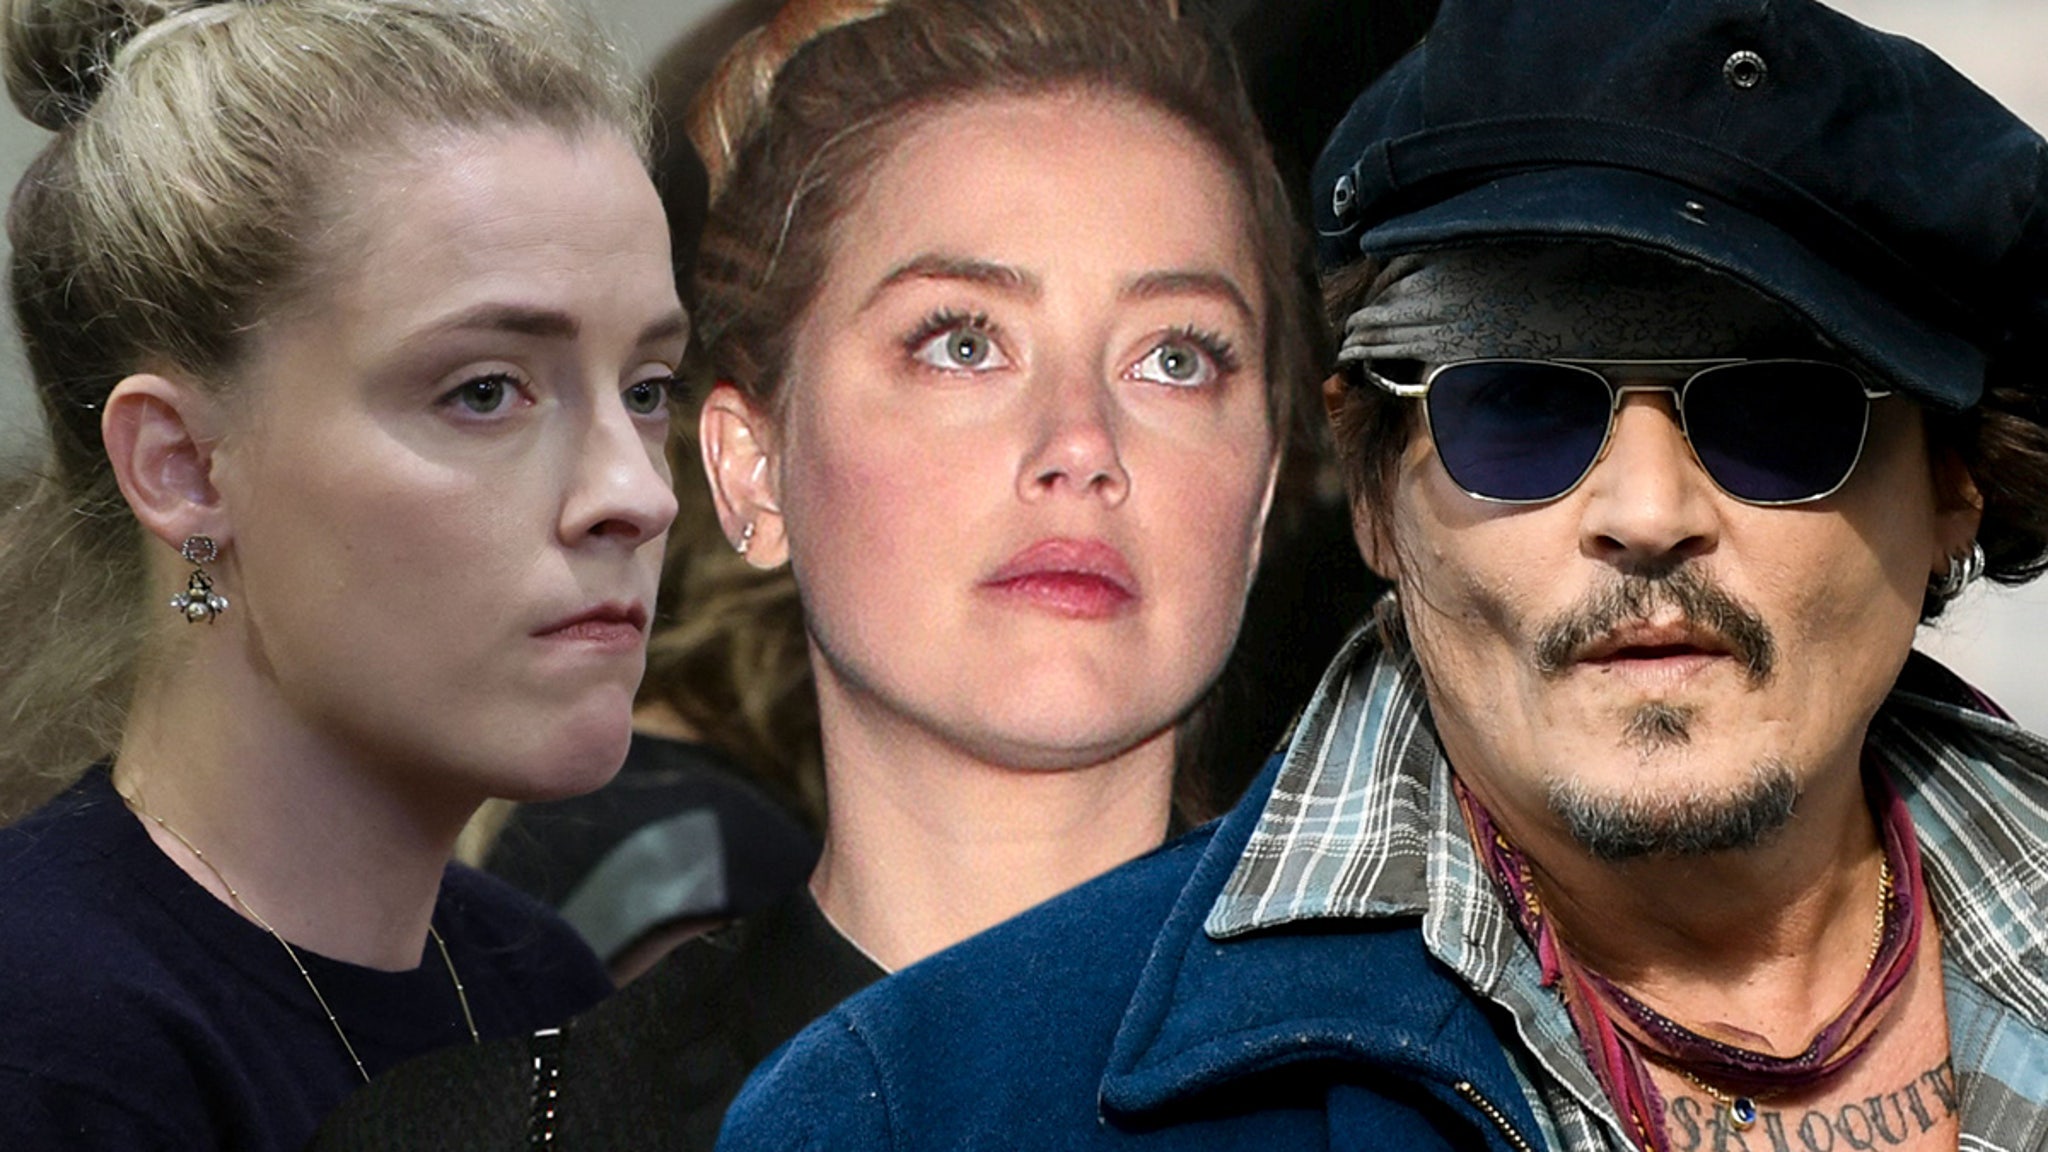 Amber Heard's Sister Whitney Criticizes 'Disgusting' MTV Over Johnny Depp Appearance